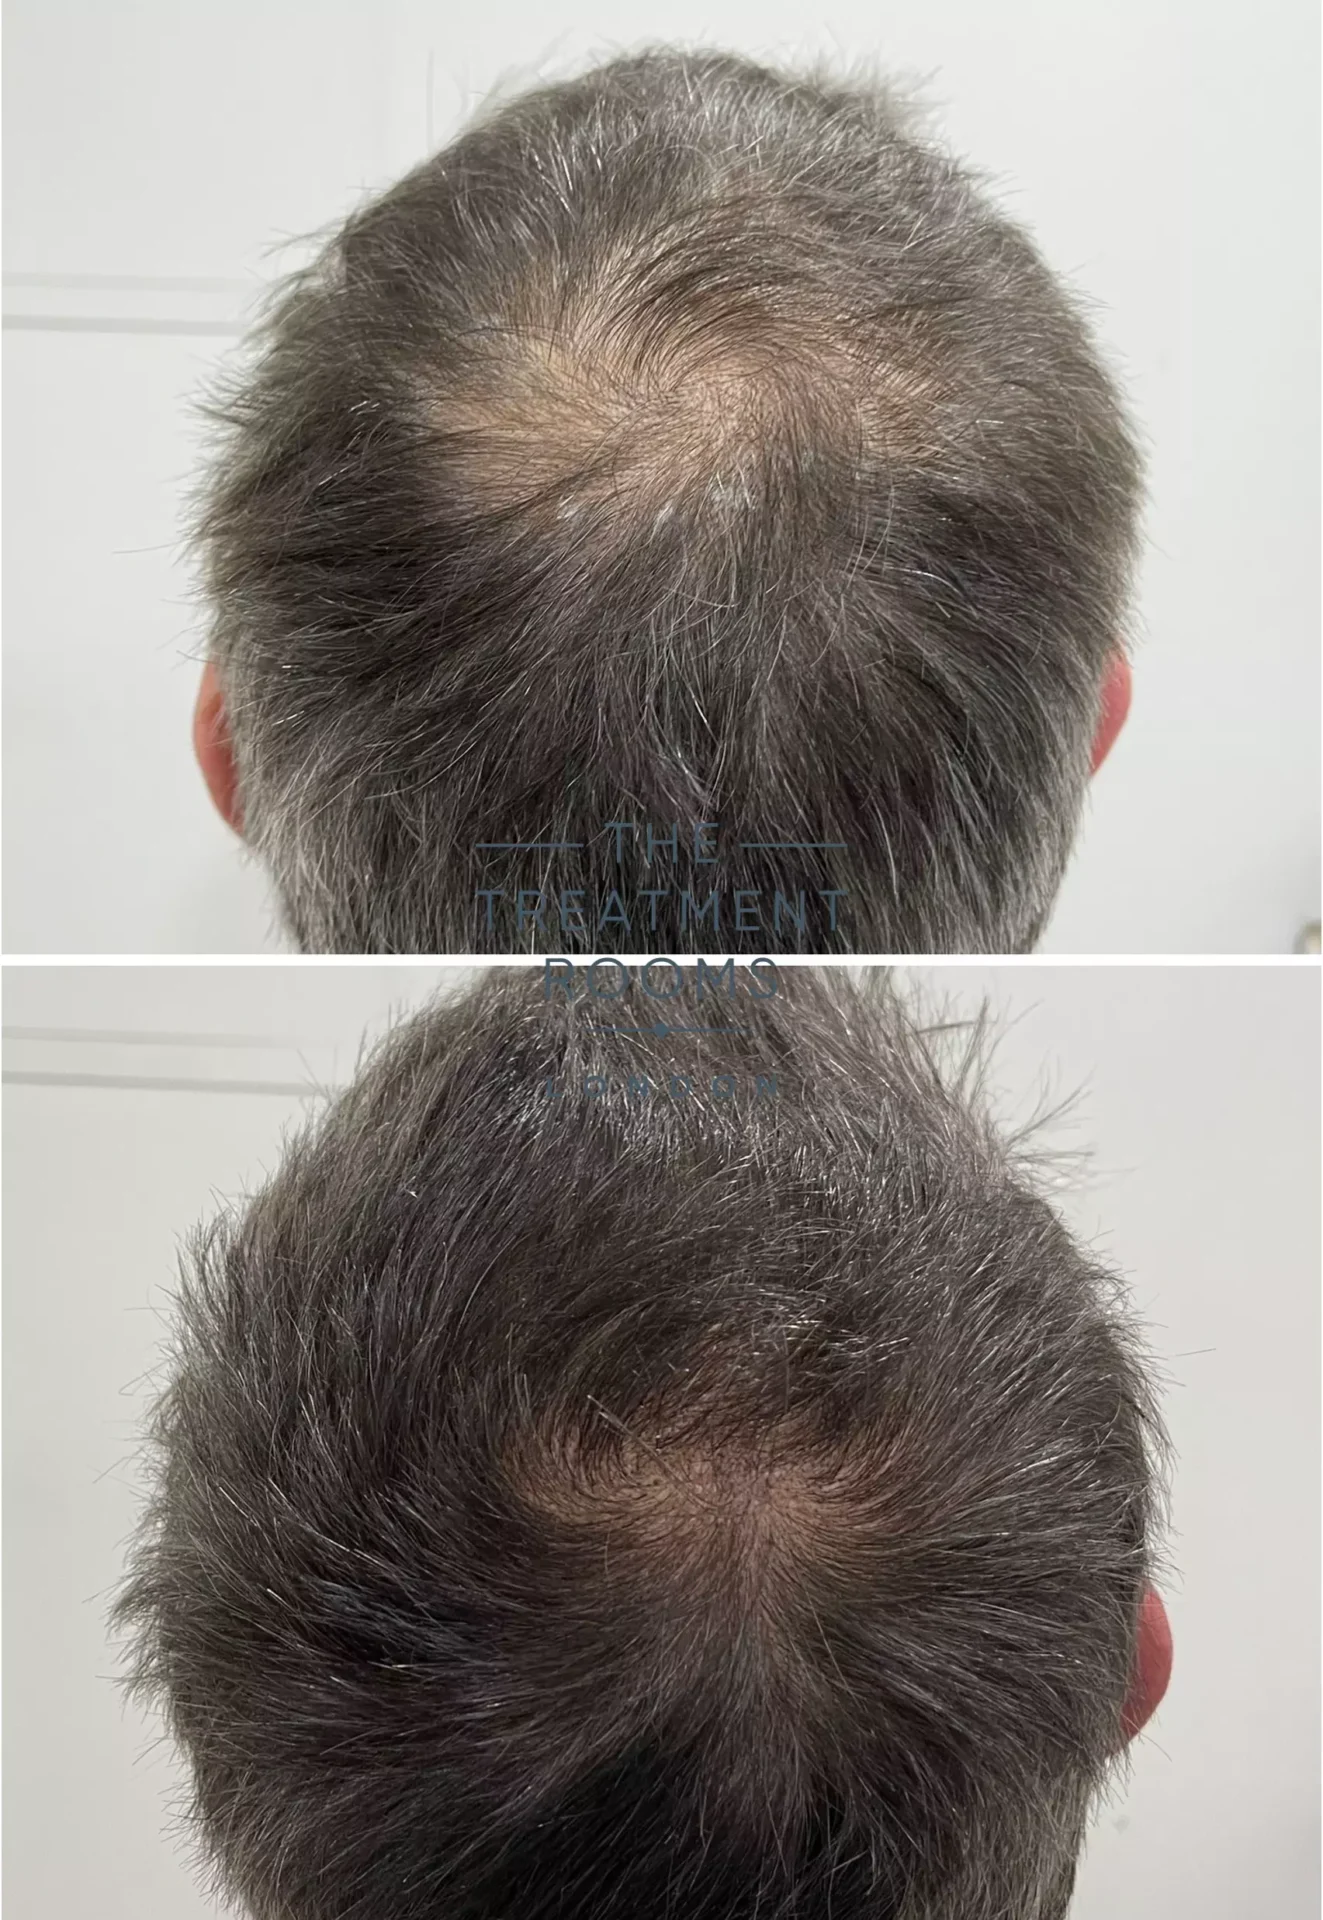 crown fue hair transplant before and after 597 grafts